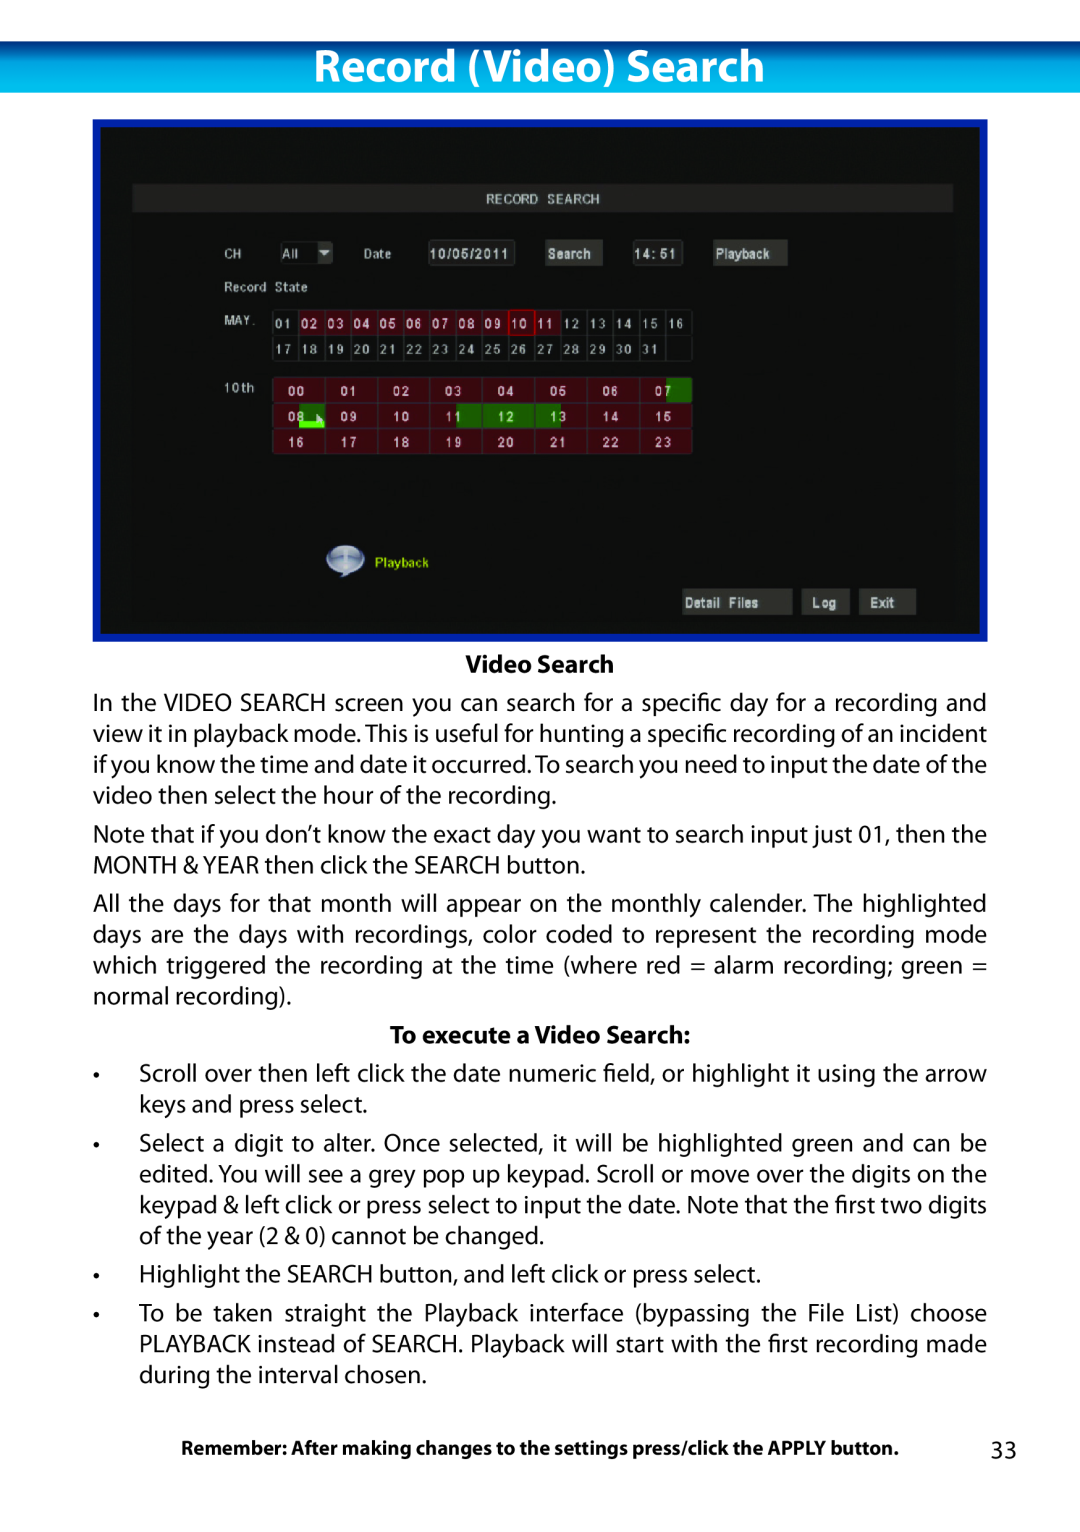 Swann H.264 manual Record Video Search, To execute a Video Search 